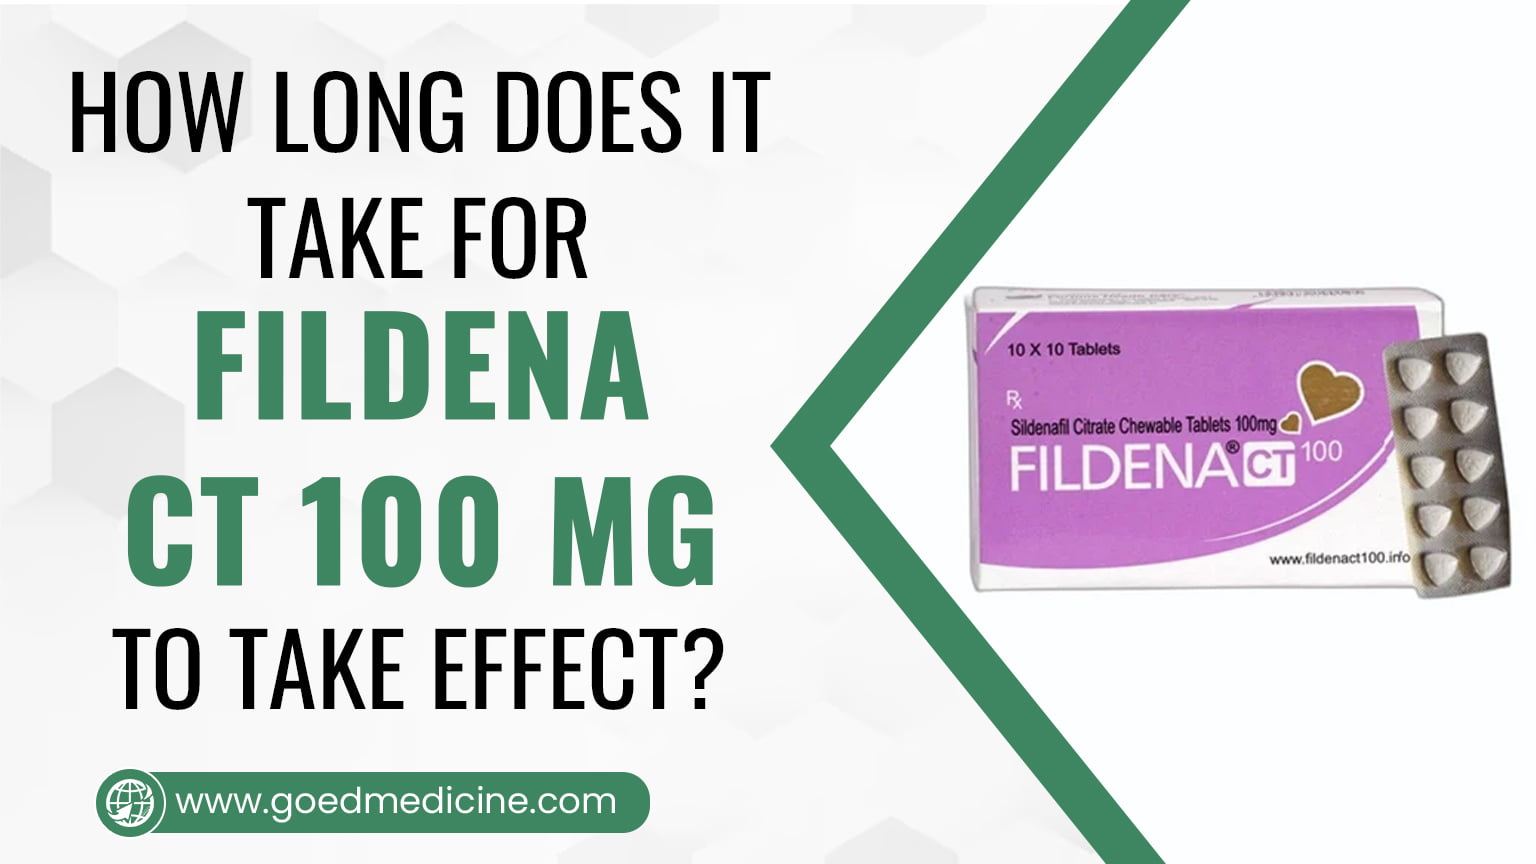 How long does it take for Fildena CT 100 mg to take effect